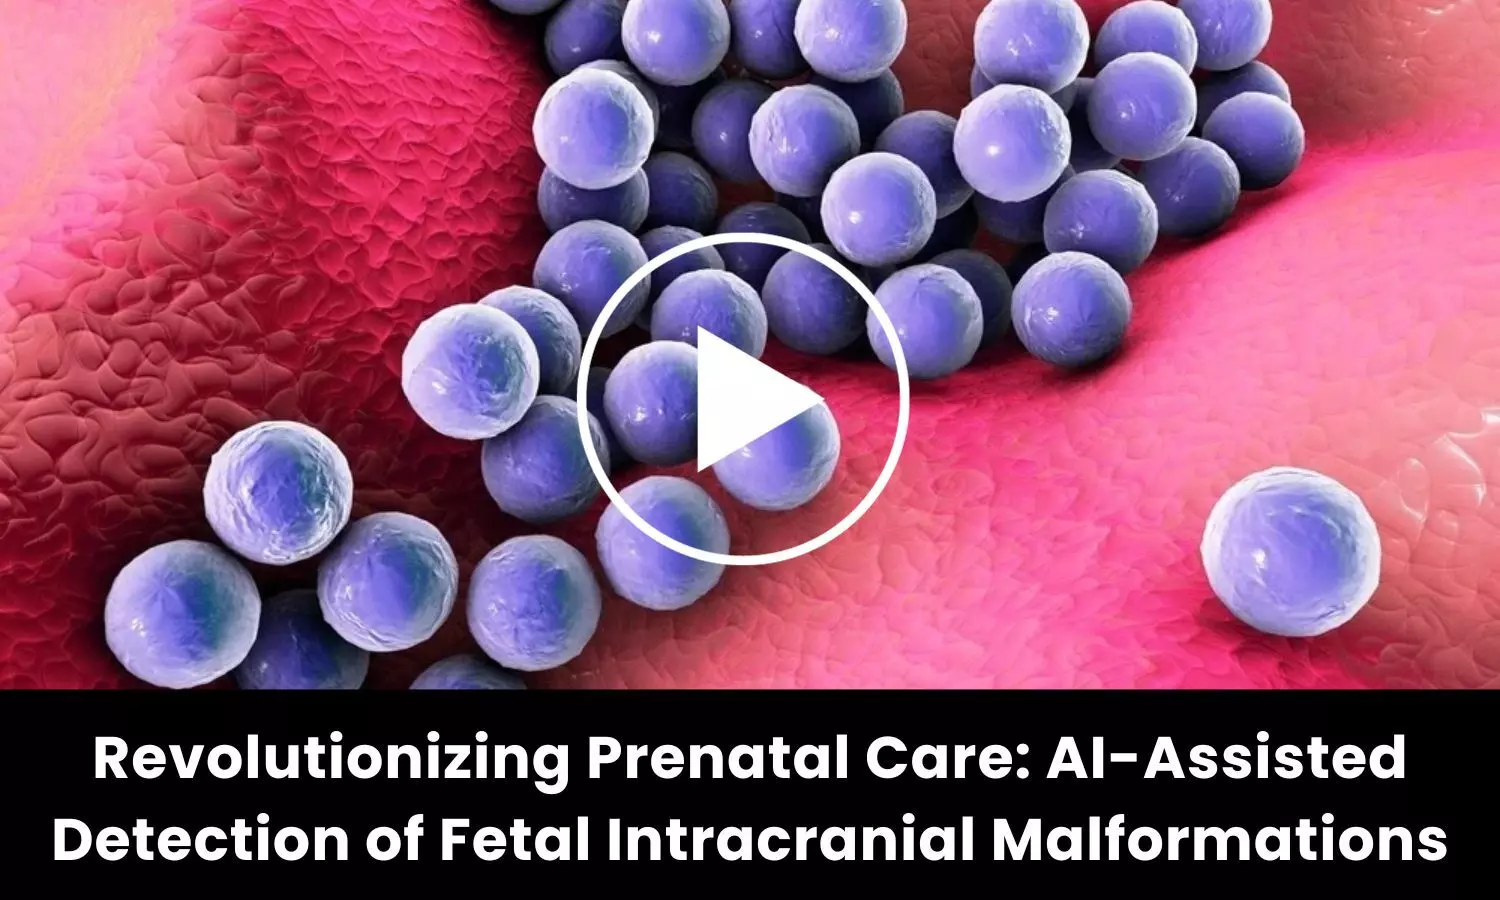 Revolutionizing Prenatal Care: AI-Assisted Detection of Fetal Intracranial Malformations